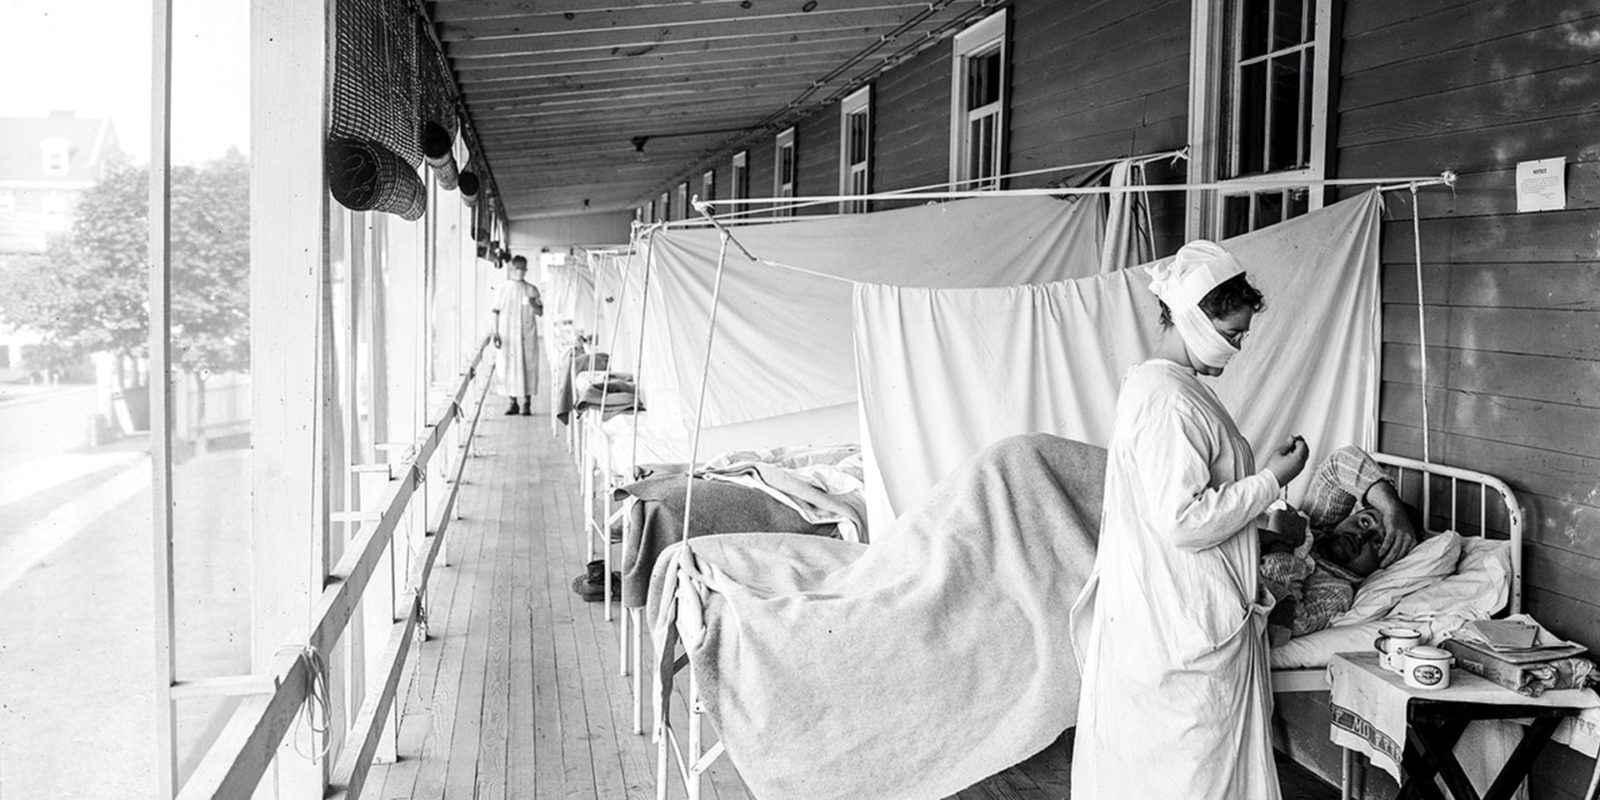 Walter Reed Hospital during 1918 influenza pandemic